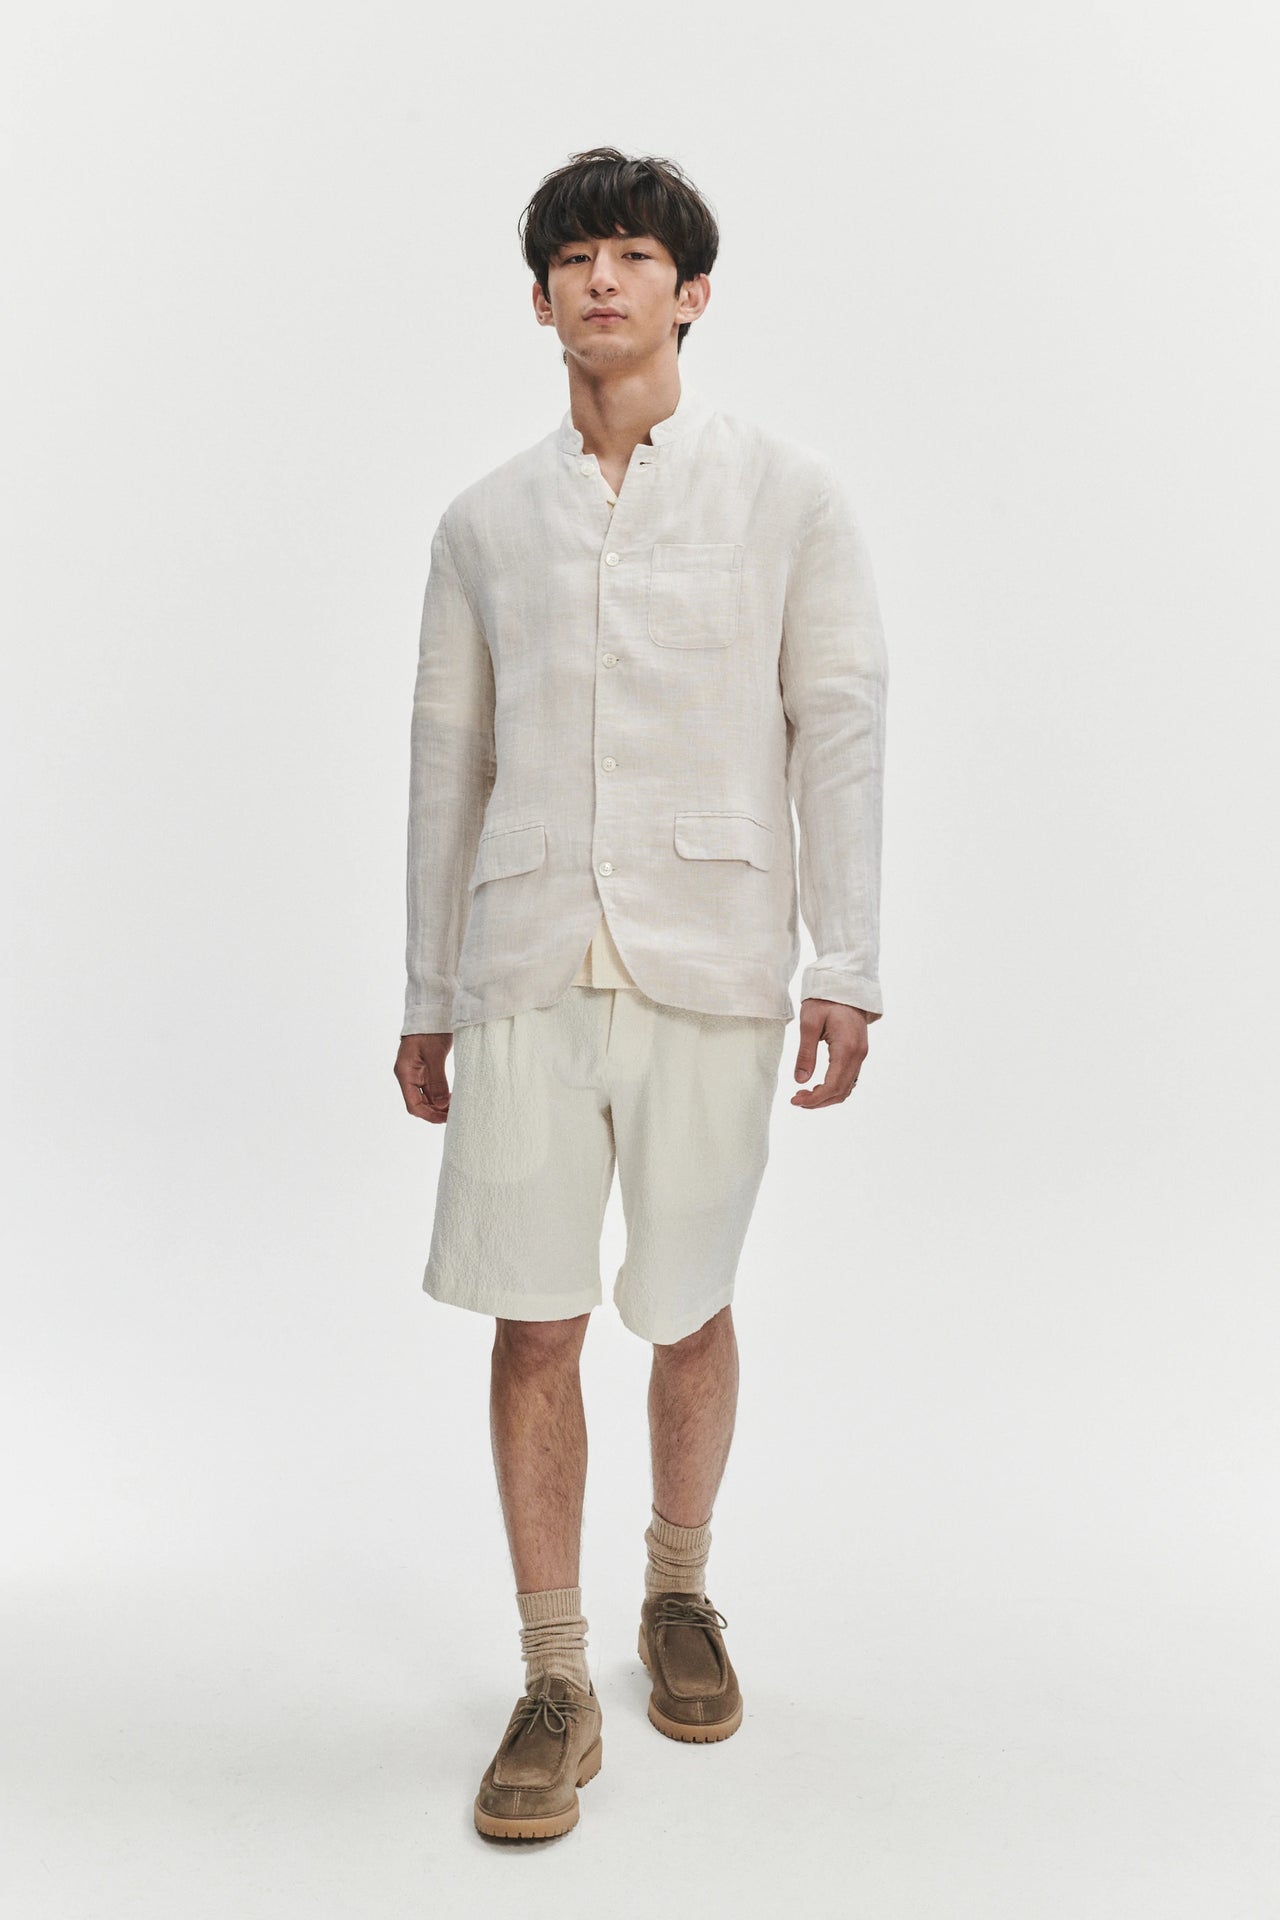 Strong Jacket in an Off-White Double Sided Fatigue Italian Linen and Cotton